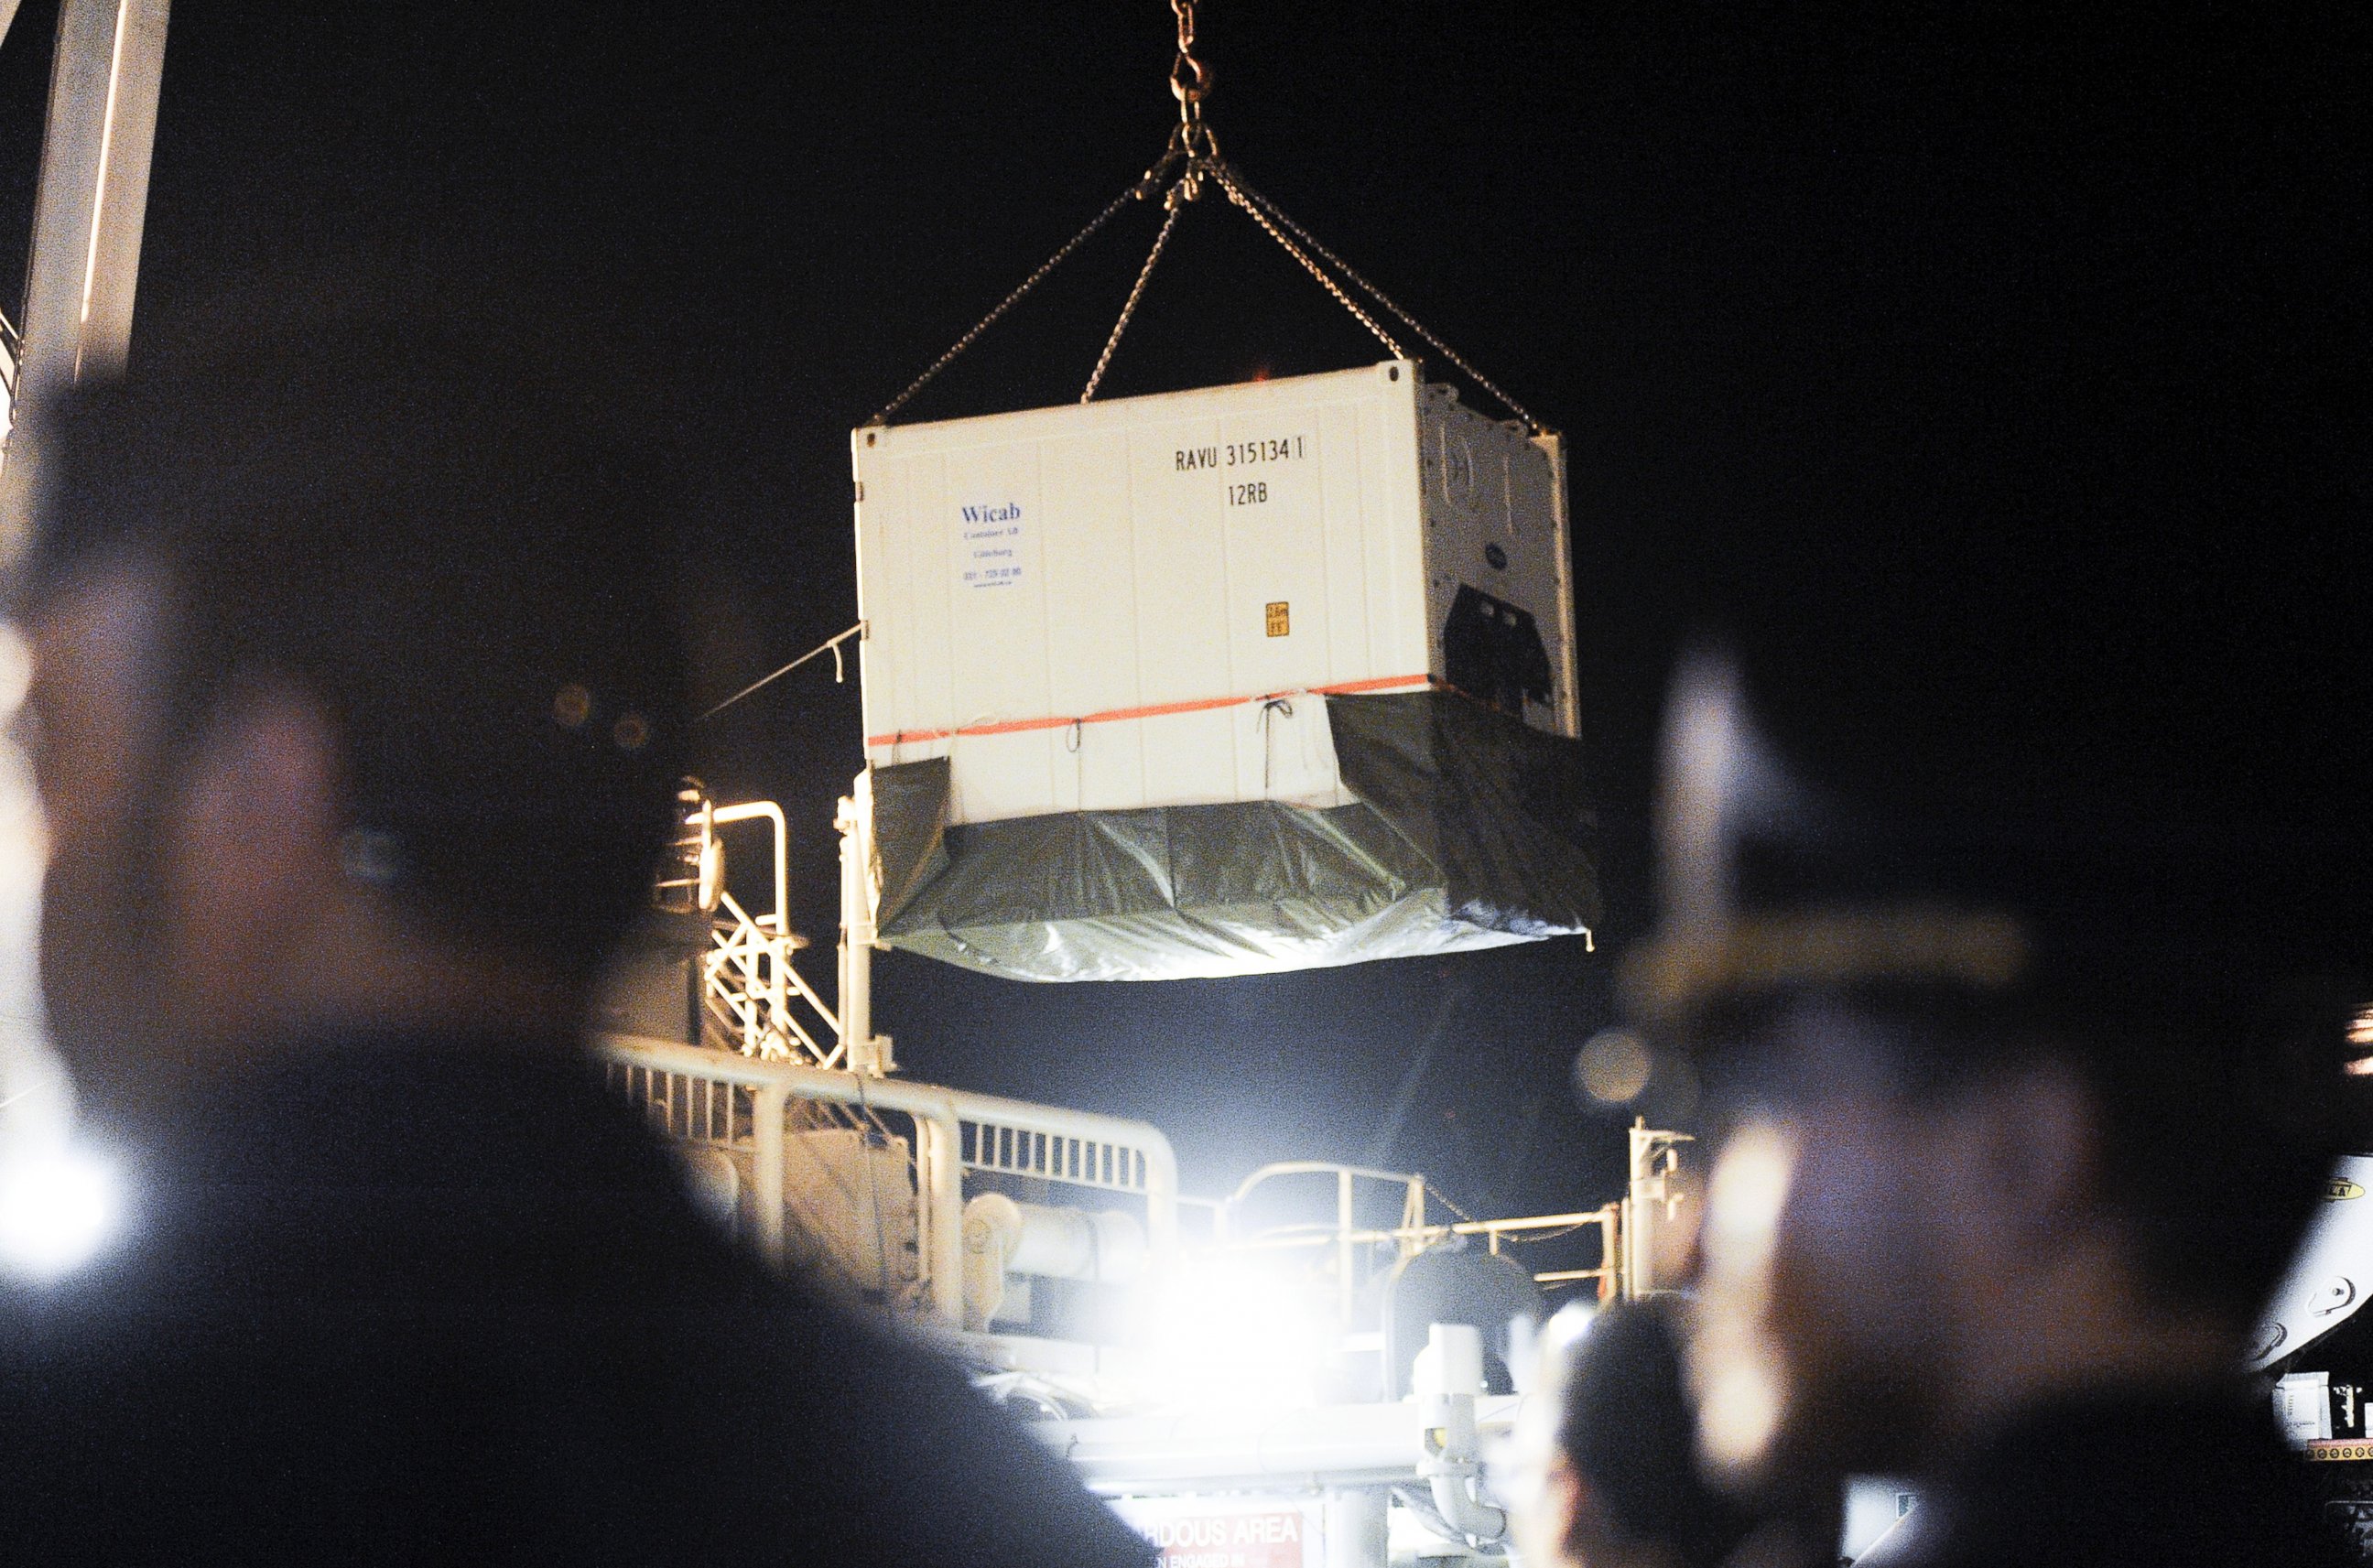 PHOTO: A container containing the bodies of 51 migrants is brought into the Sicilian harbor of Palermo, Italy, from Swedish Coast Guard vessel KBV 001 Poseidon, Aug. 27, 2015.